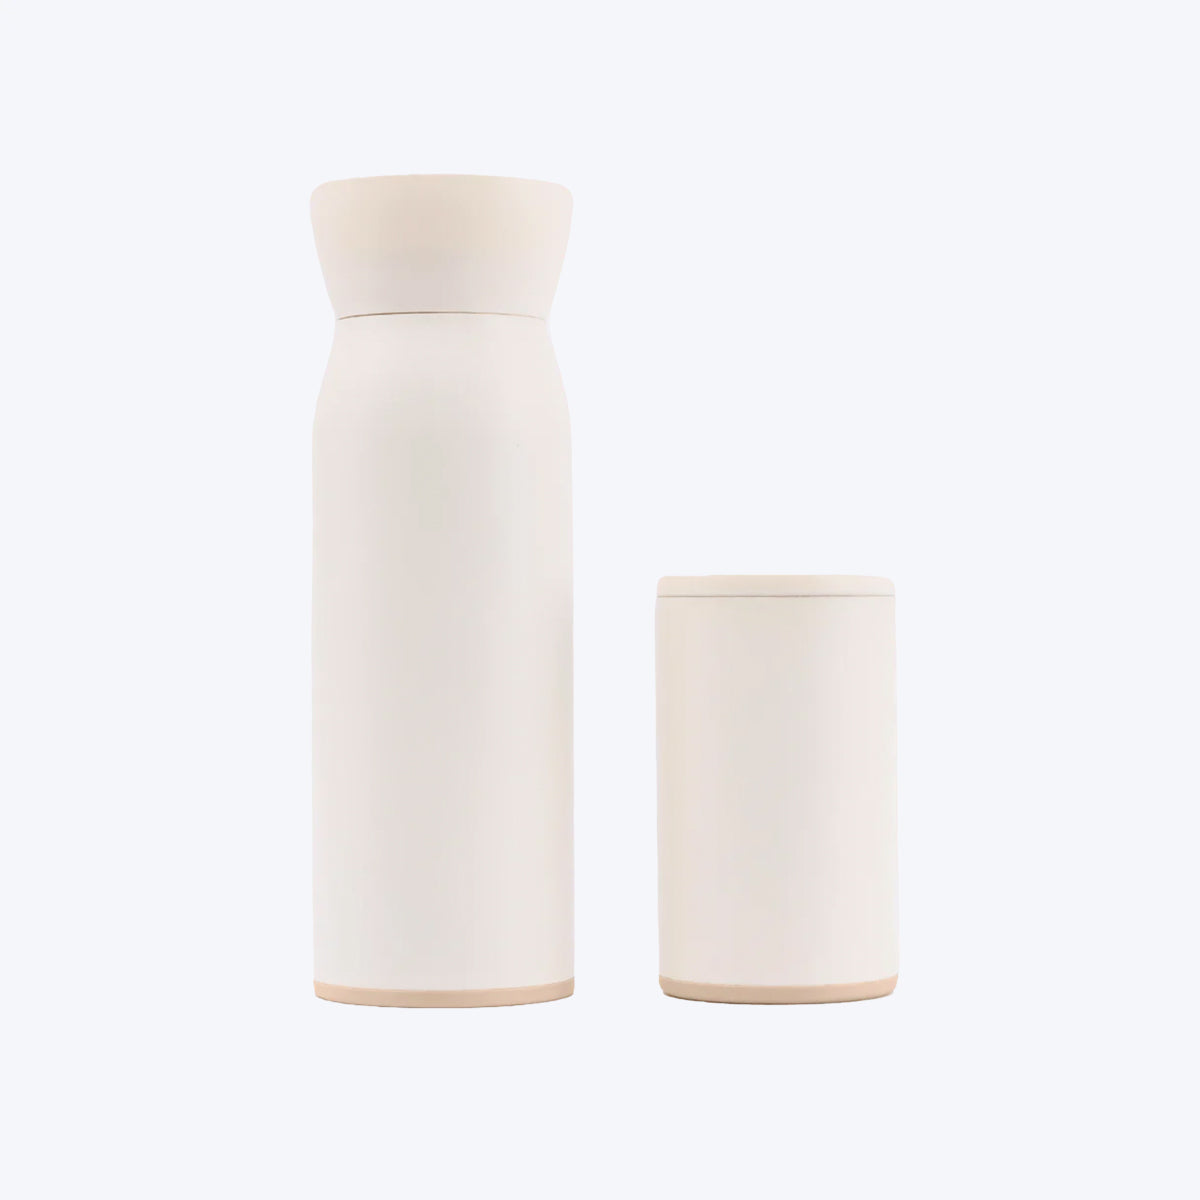 hitch-bottle-and-cup-natural-white.jpg__PID:7cf8d24c-dd07-488b-a1c6-a34829fc0f77